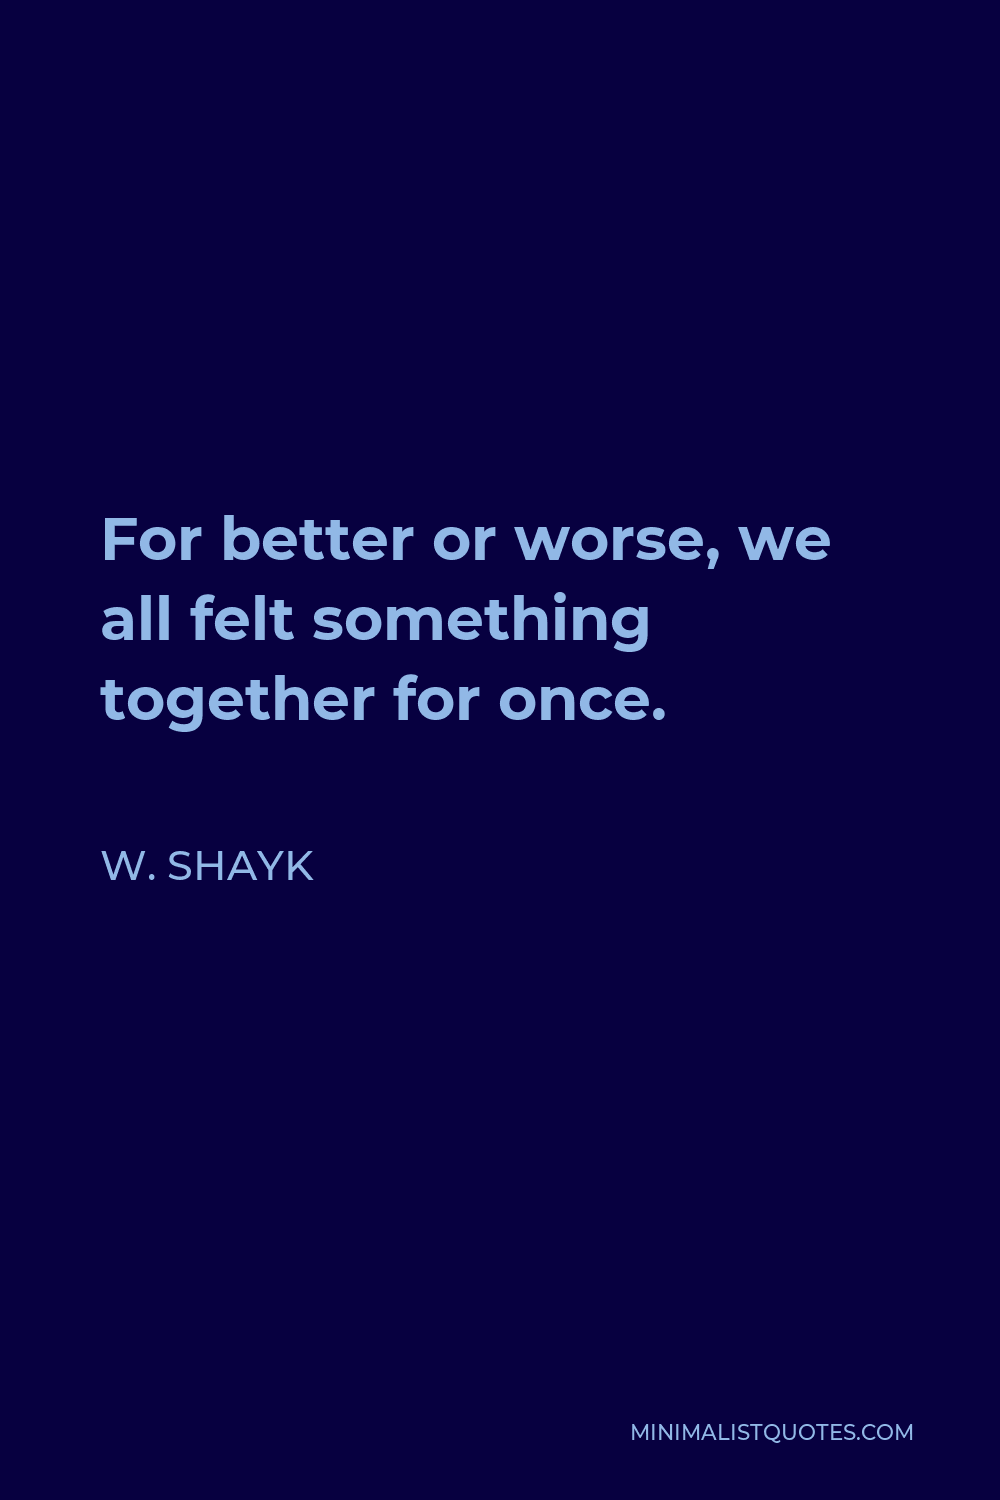 W. Shayk Quote - For better or worse, we all felt something together for once.